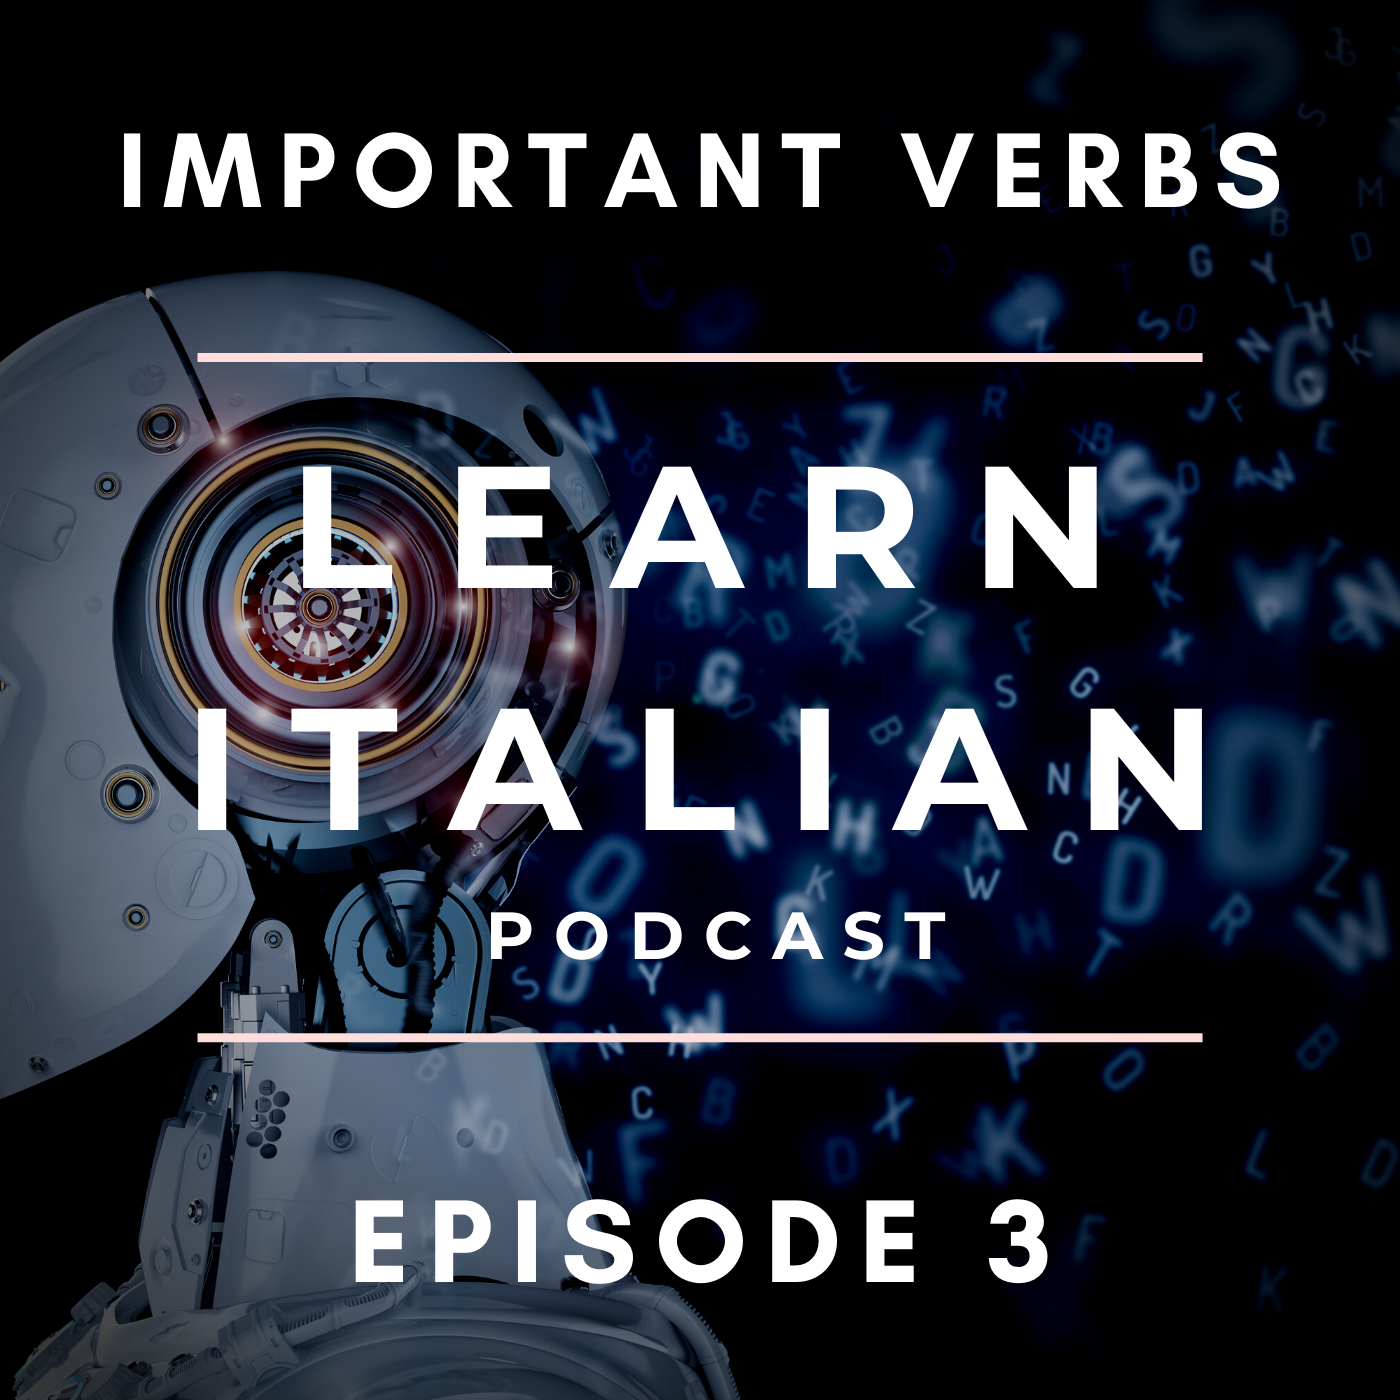 Learn Italian Podcast: Important Verbs (Episode 3)